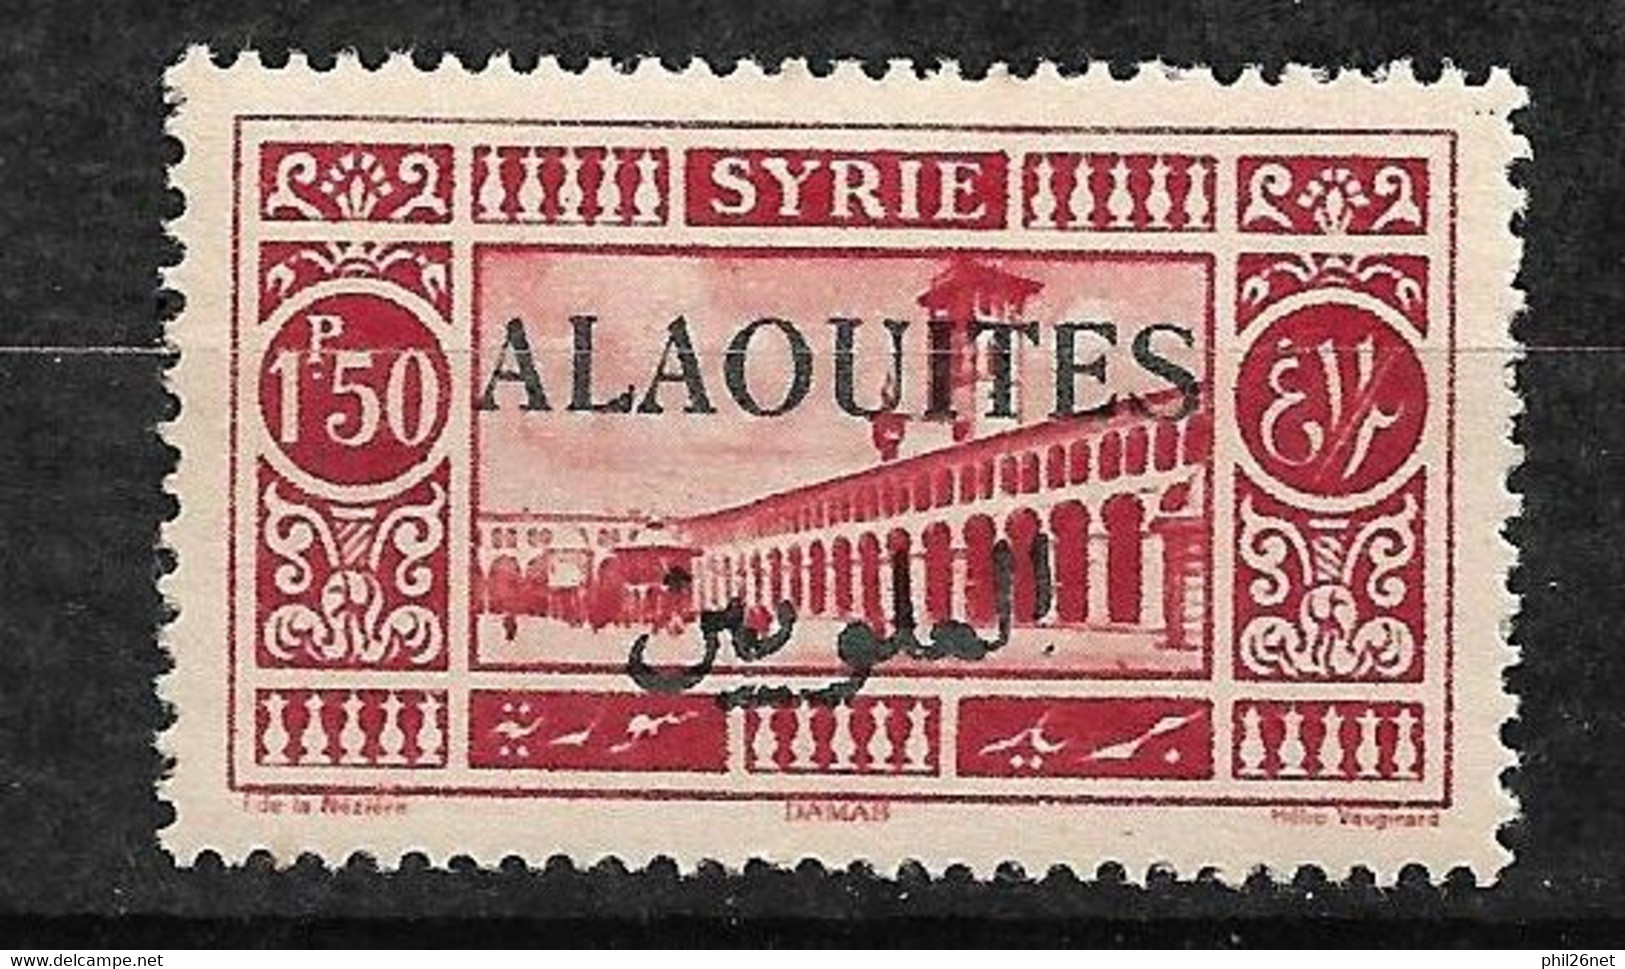 Alaouites N° 28a  Surcharge Noire    Neuf *     B/TB         - Unused Stamps